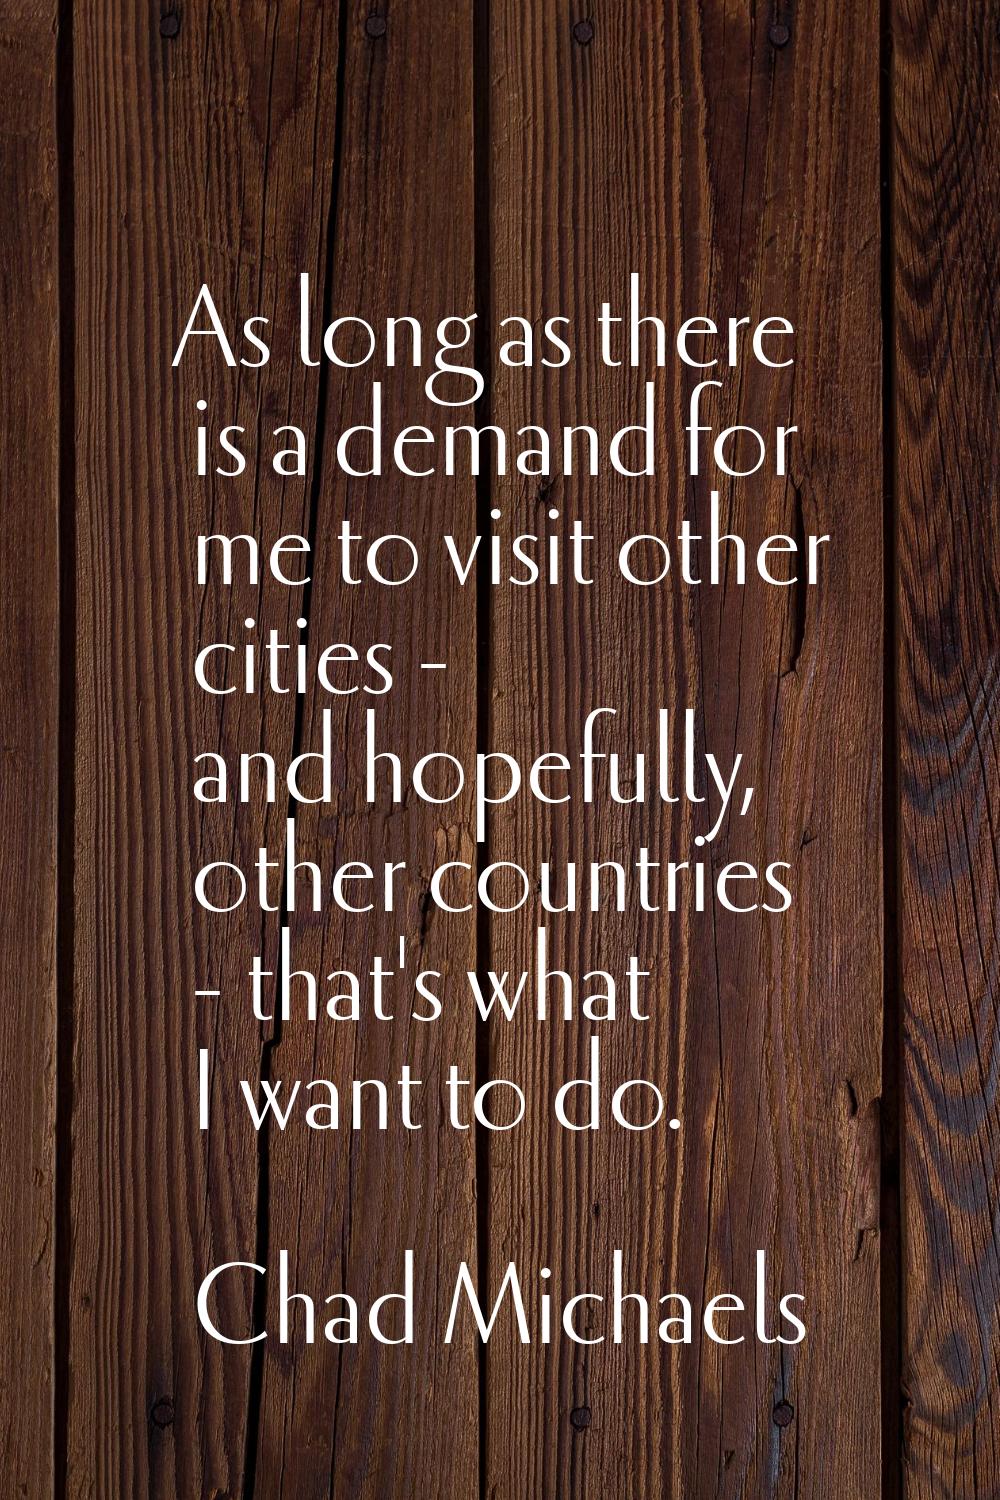 As long as there is a demand for me to visit other cities - and hopefully, other countries - that's